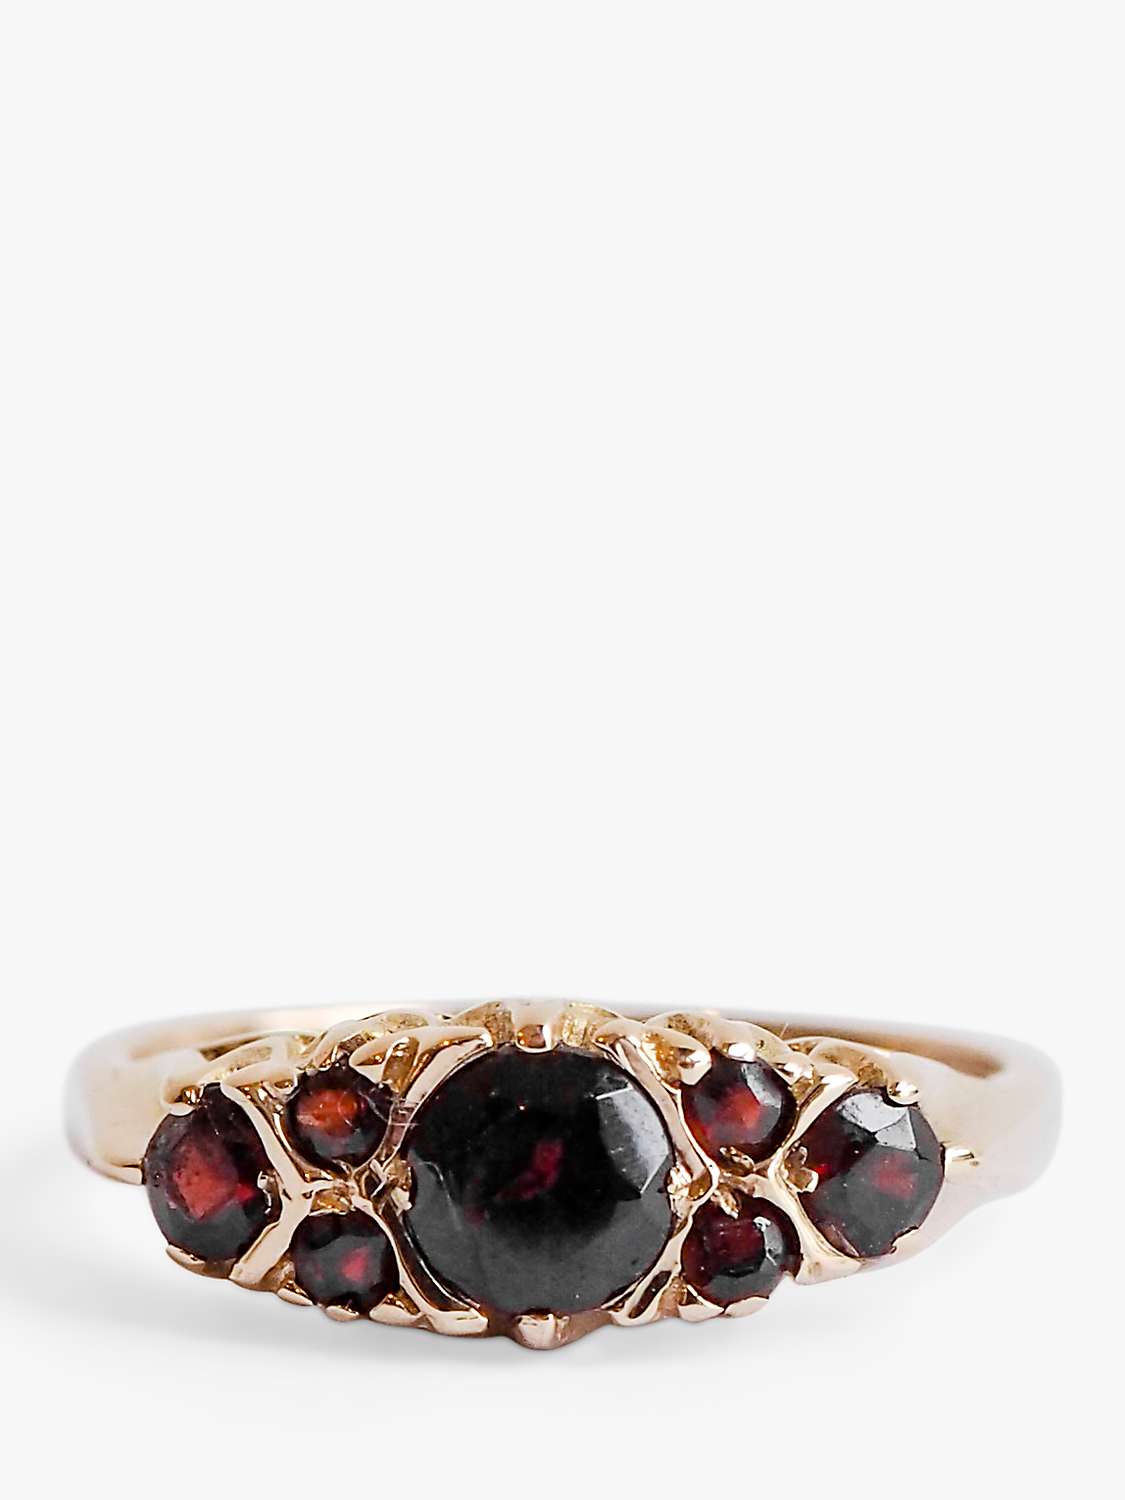 Buy L & T Heirlooms Second Hand 9ct Yellow Gold Garnet Ring, Dated Circa 1975 Online at johnlewis.com